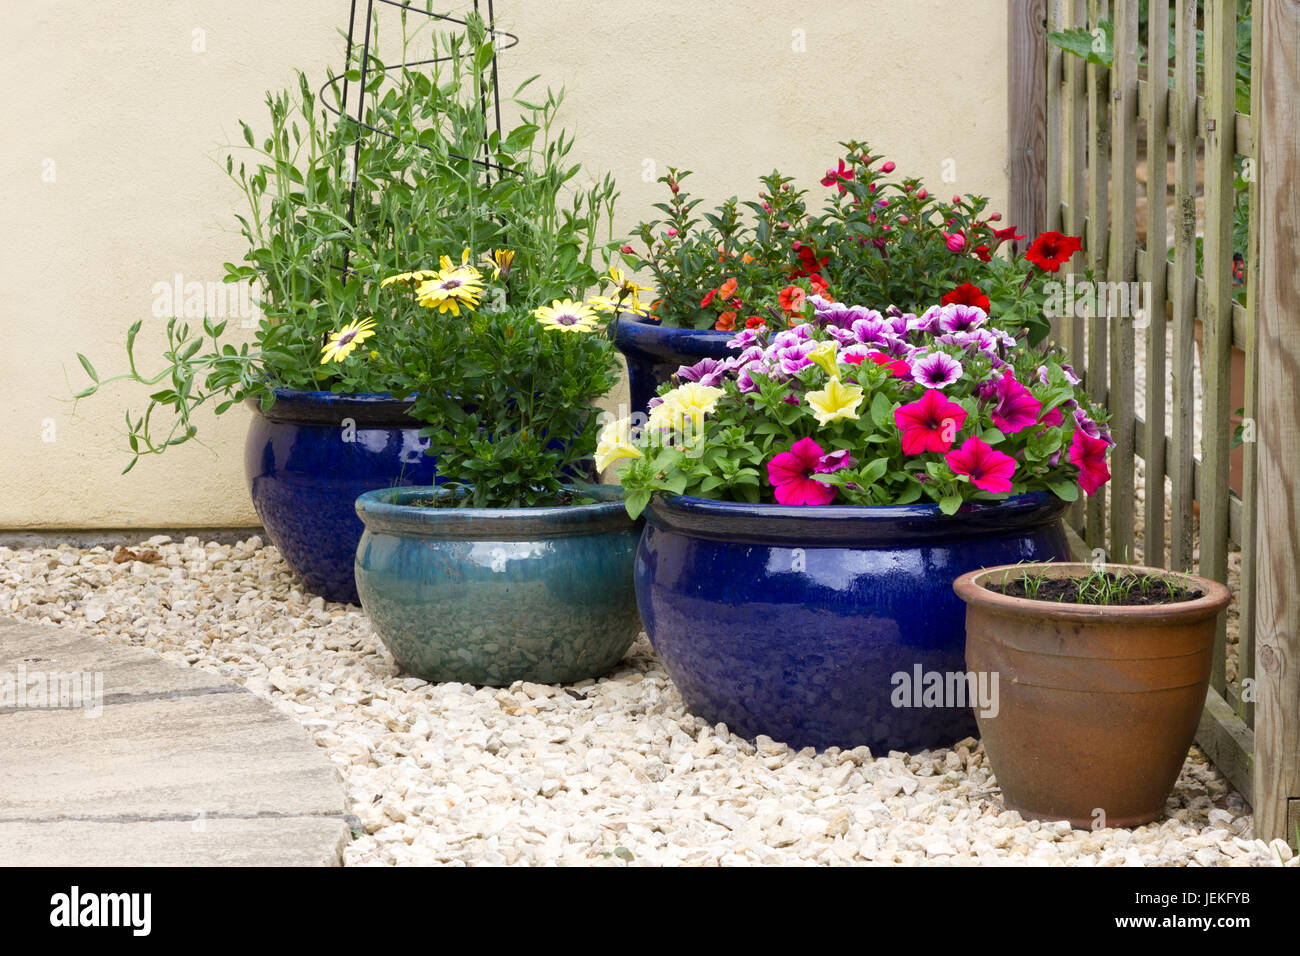 Pots of flowers in a small garden Stock Photo